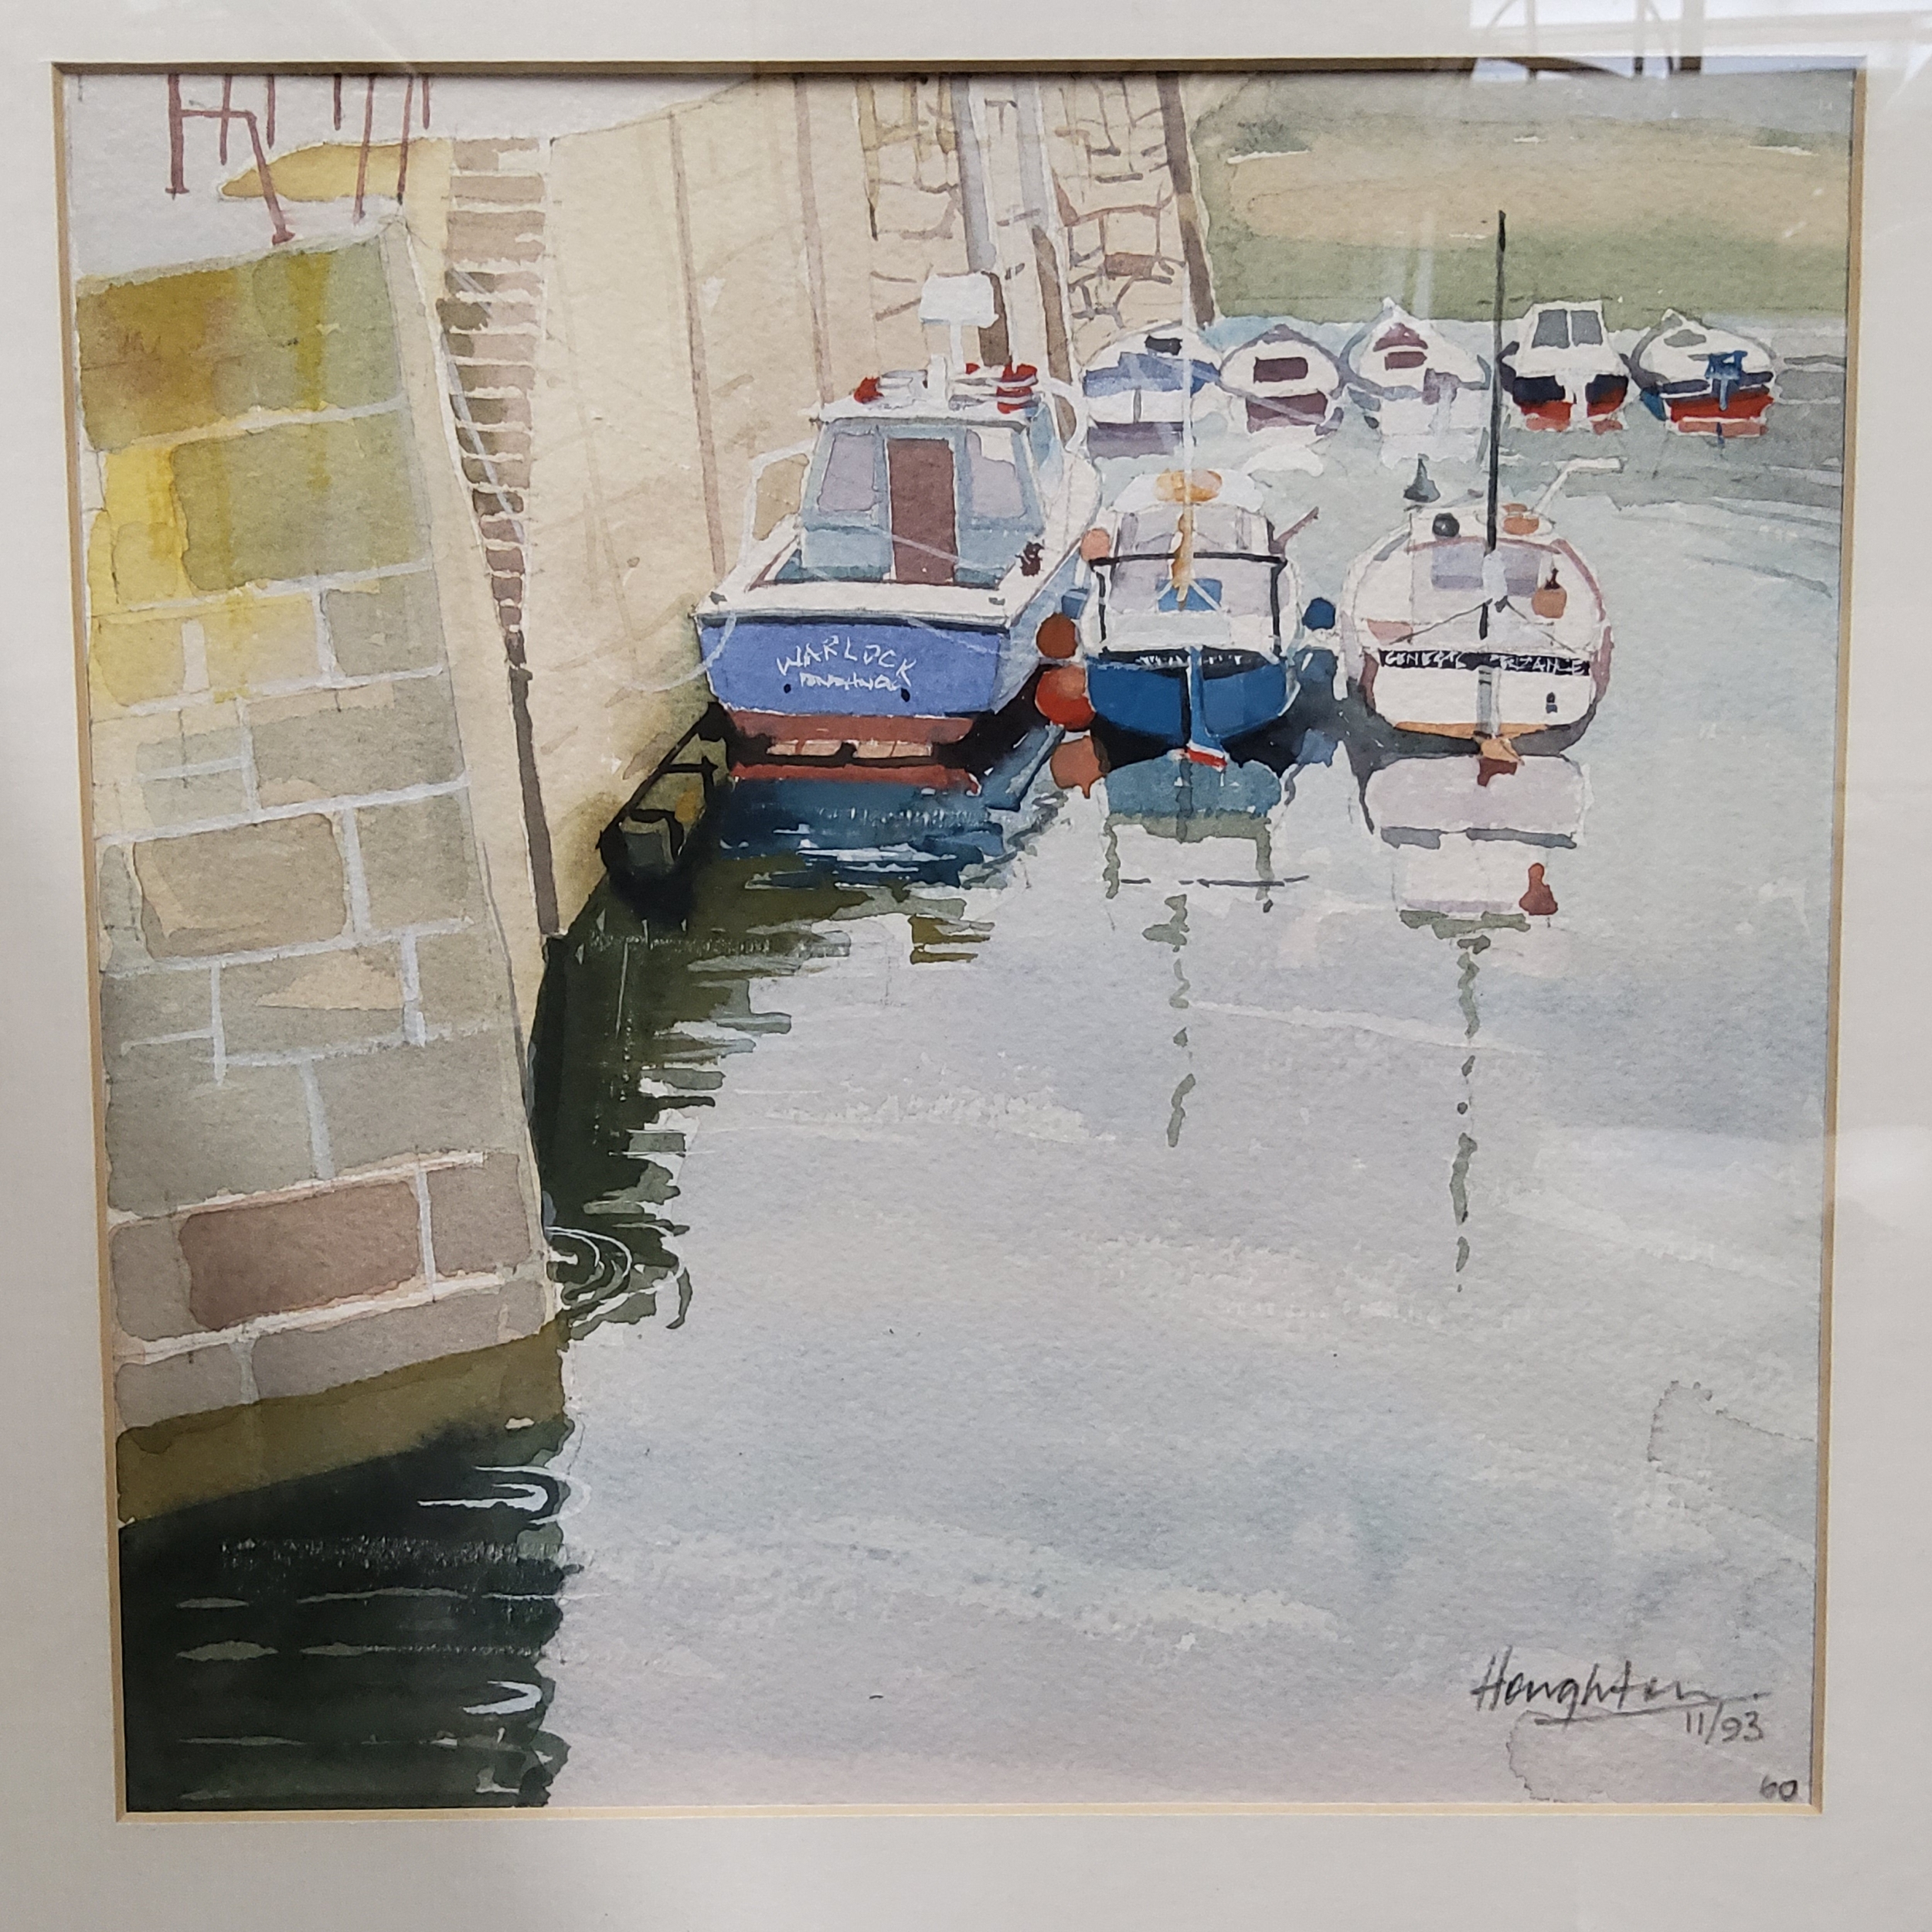 Tony Houghton (Sheffield Artist) Mousehole Reflections, signed in pencil, dated 11/93, watercolour